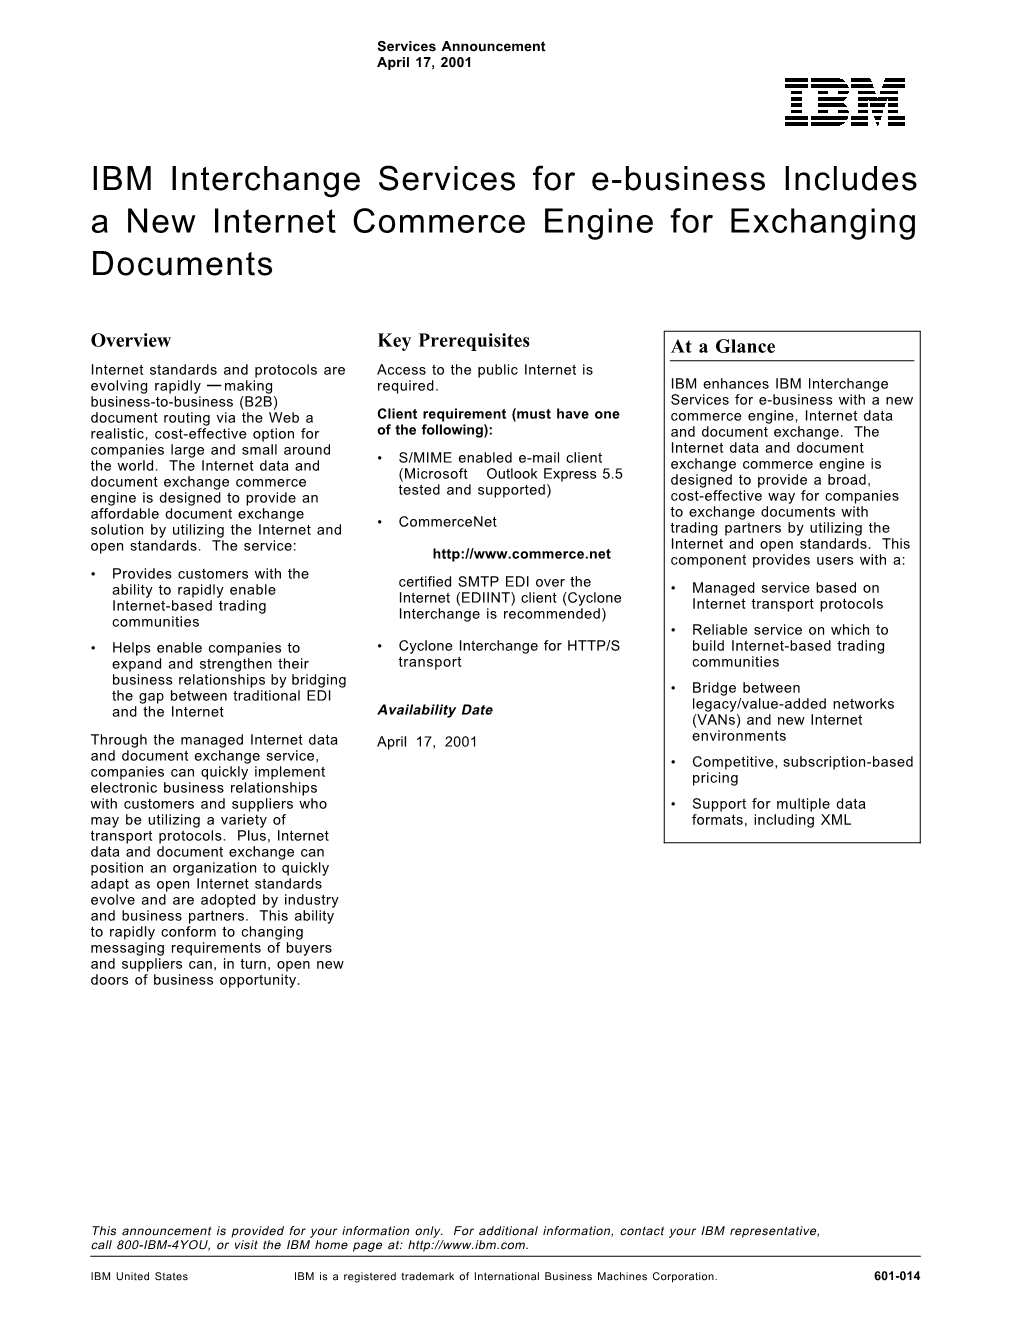 IBM Interchange Services for E-Business Includes a New Internet Commerce Engine for Exchanging Documents